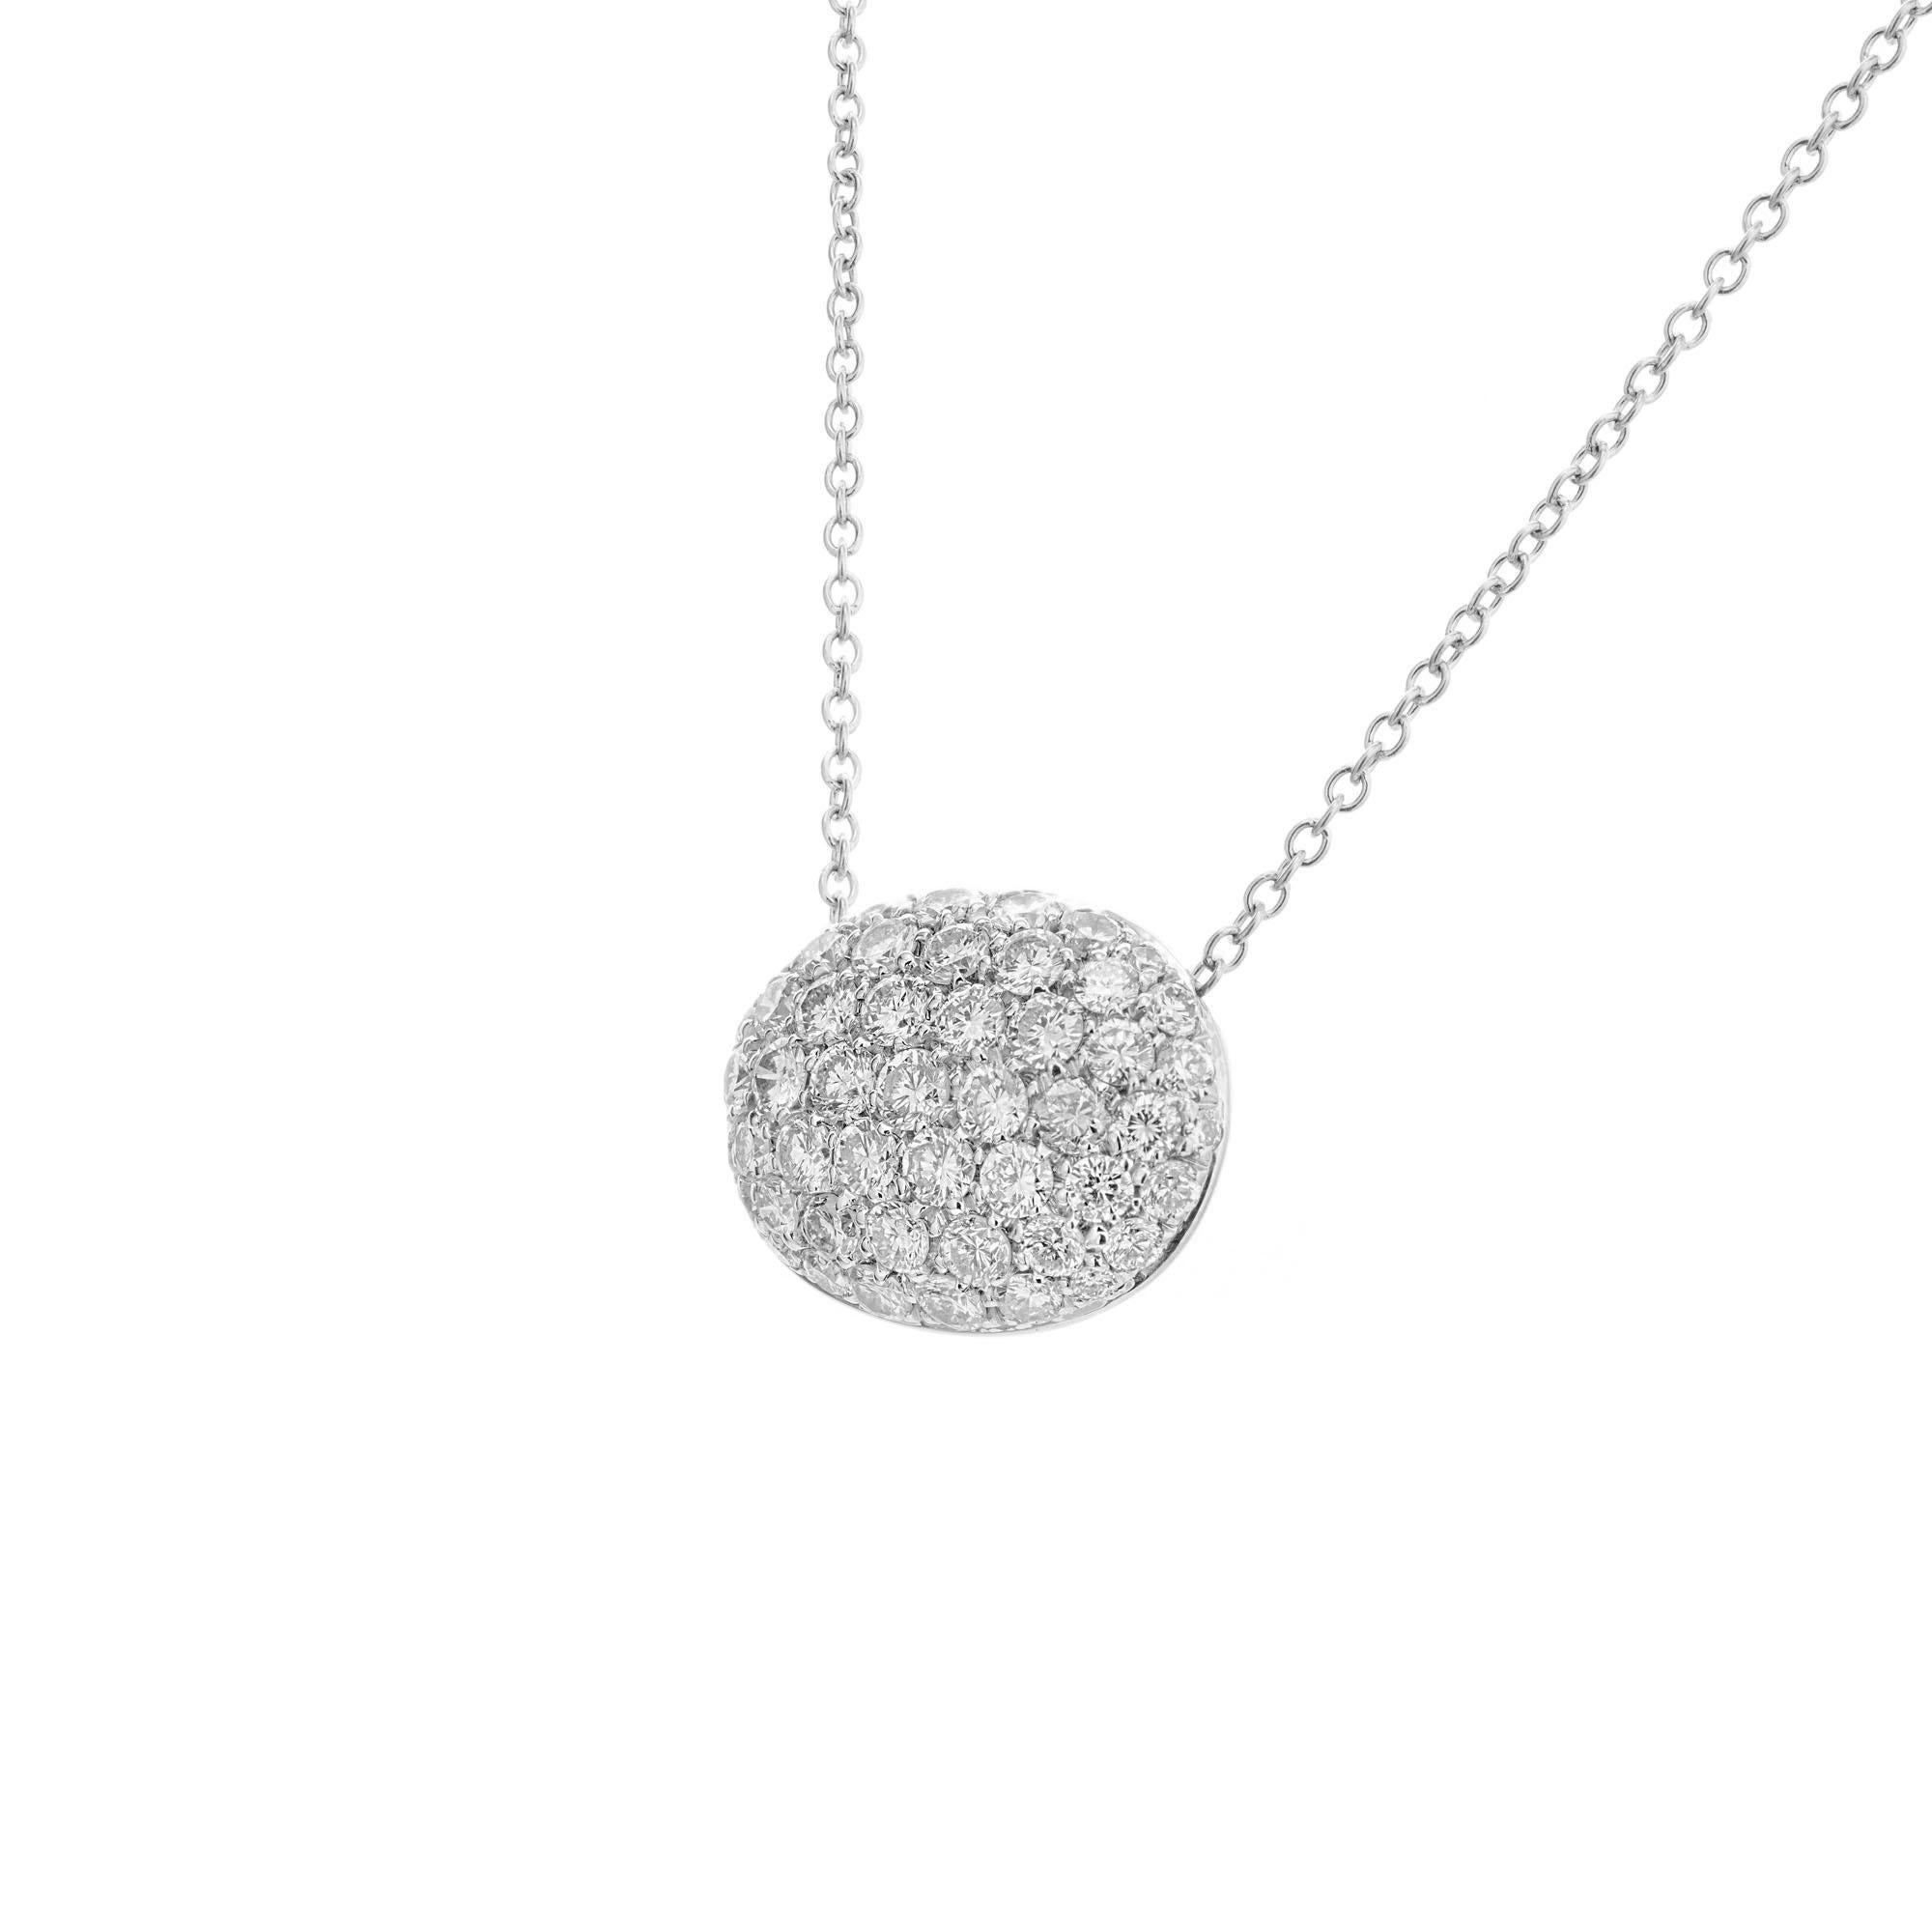 Diamond pendant necklace. 51 round pave diamond cluster domed over pendant. 18k white and yellow gold.  16 inch white gold chain. 

51 round brilliant cut diamonds, G VS approx. 2.00cts
18k yellow gold 
18k white gold 
Stamped: 750
5.6 grams
Top to